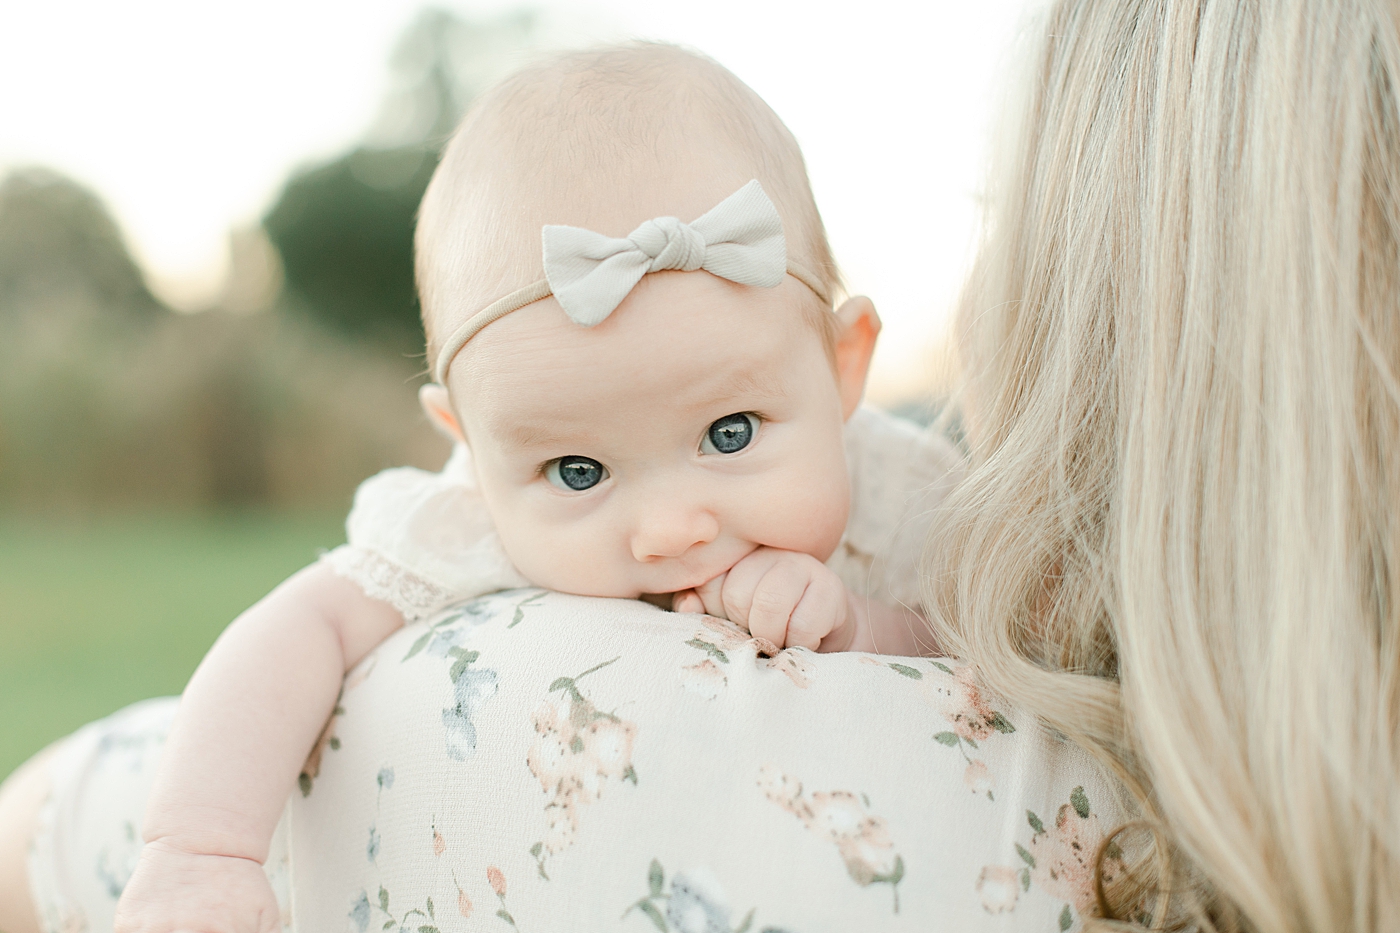 Baby girl with a bow held by mom | Photo by Little Sunshine Photography